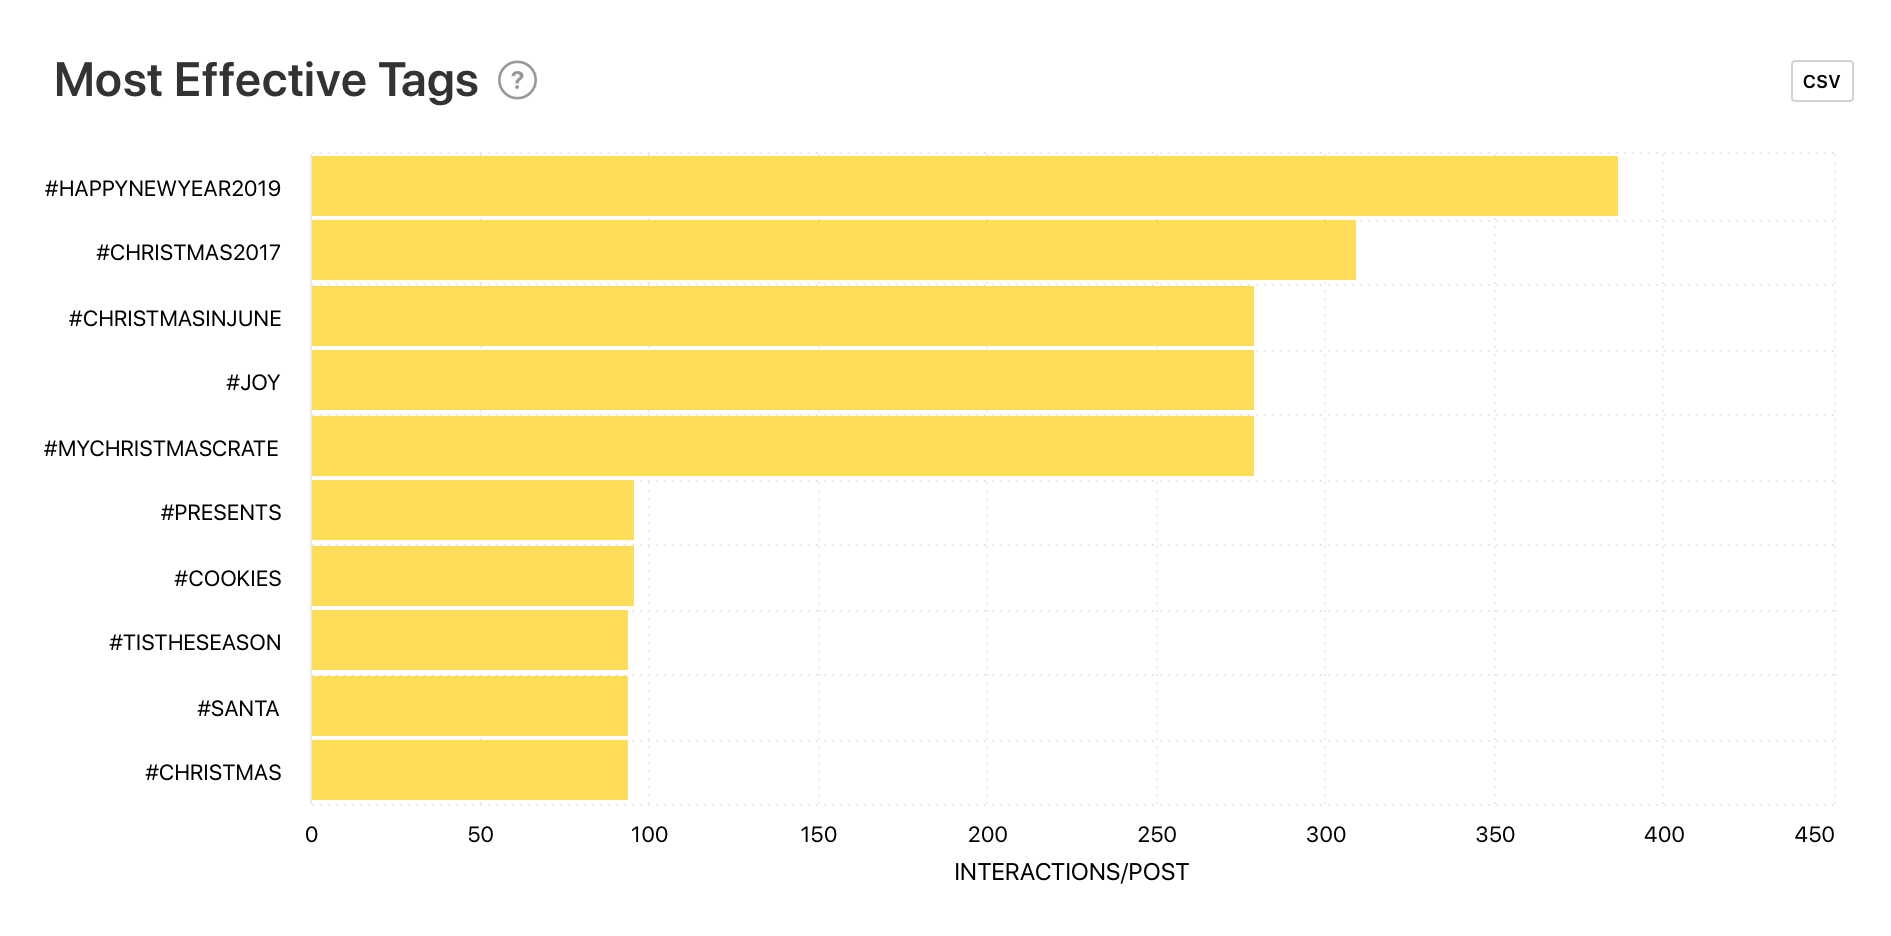 Most Effective Tags graph by Minter.io